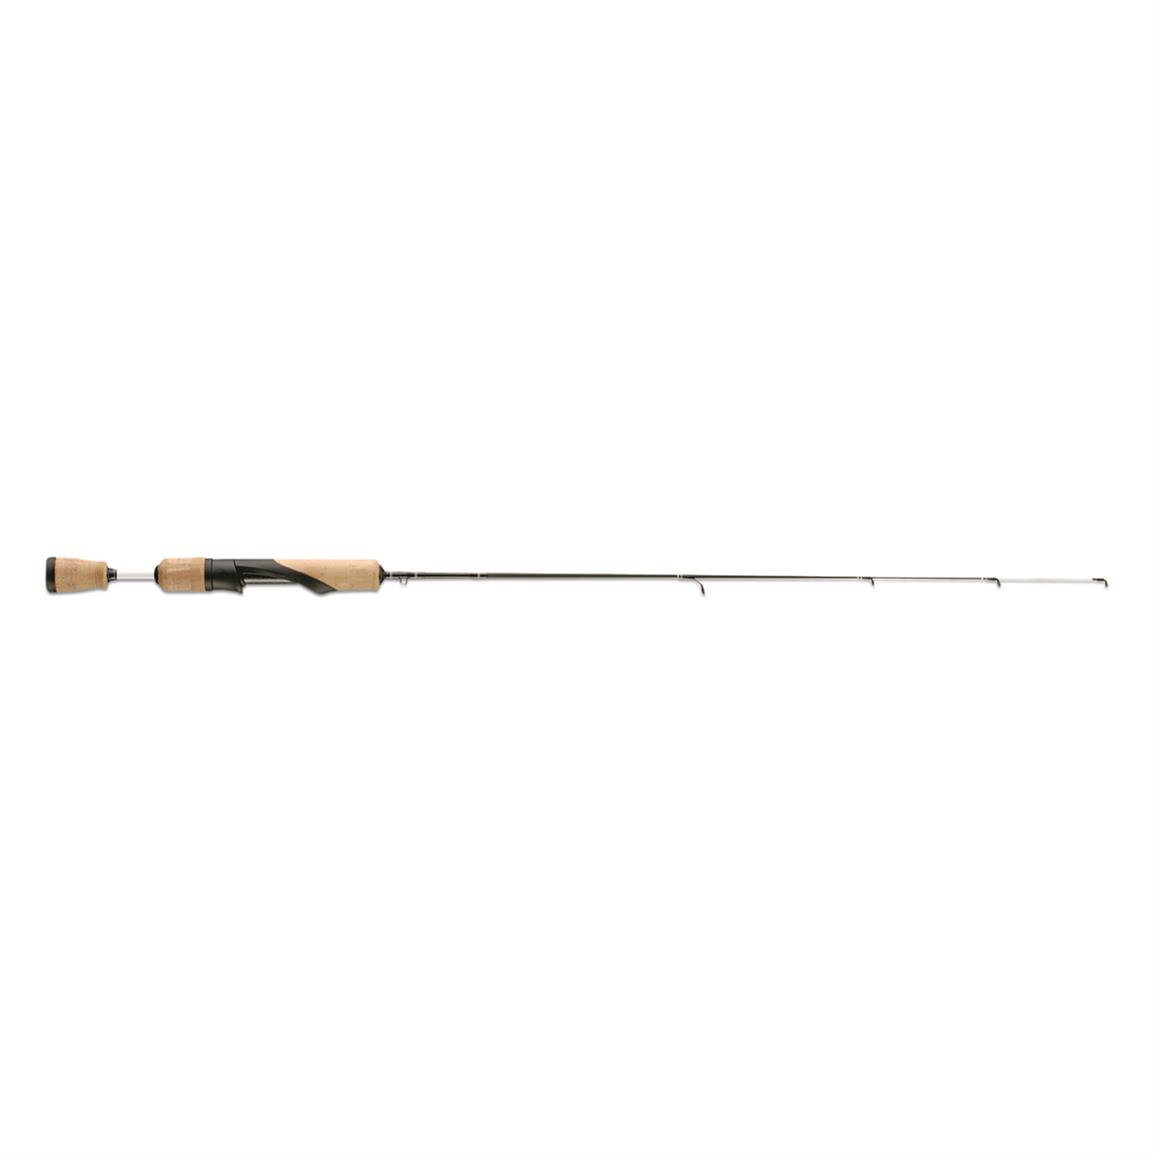 St. Croix Tundra Ice Fishing Rod, 30l., Medium Power, Fast Action -  723885, Ice Fishing Rods at Sportsman's Guide